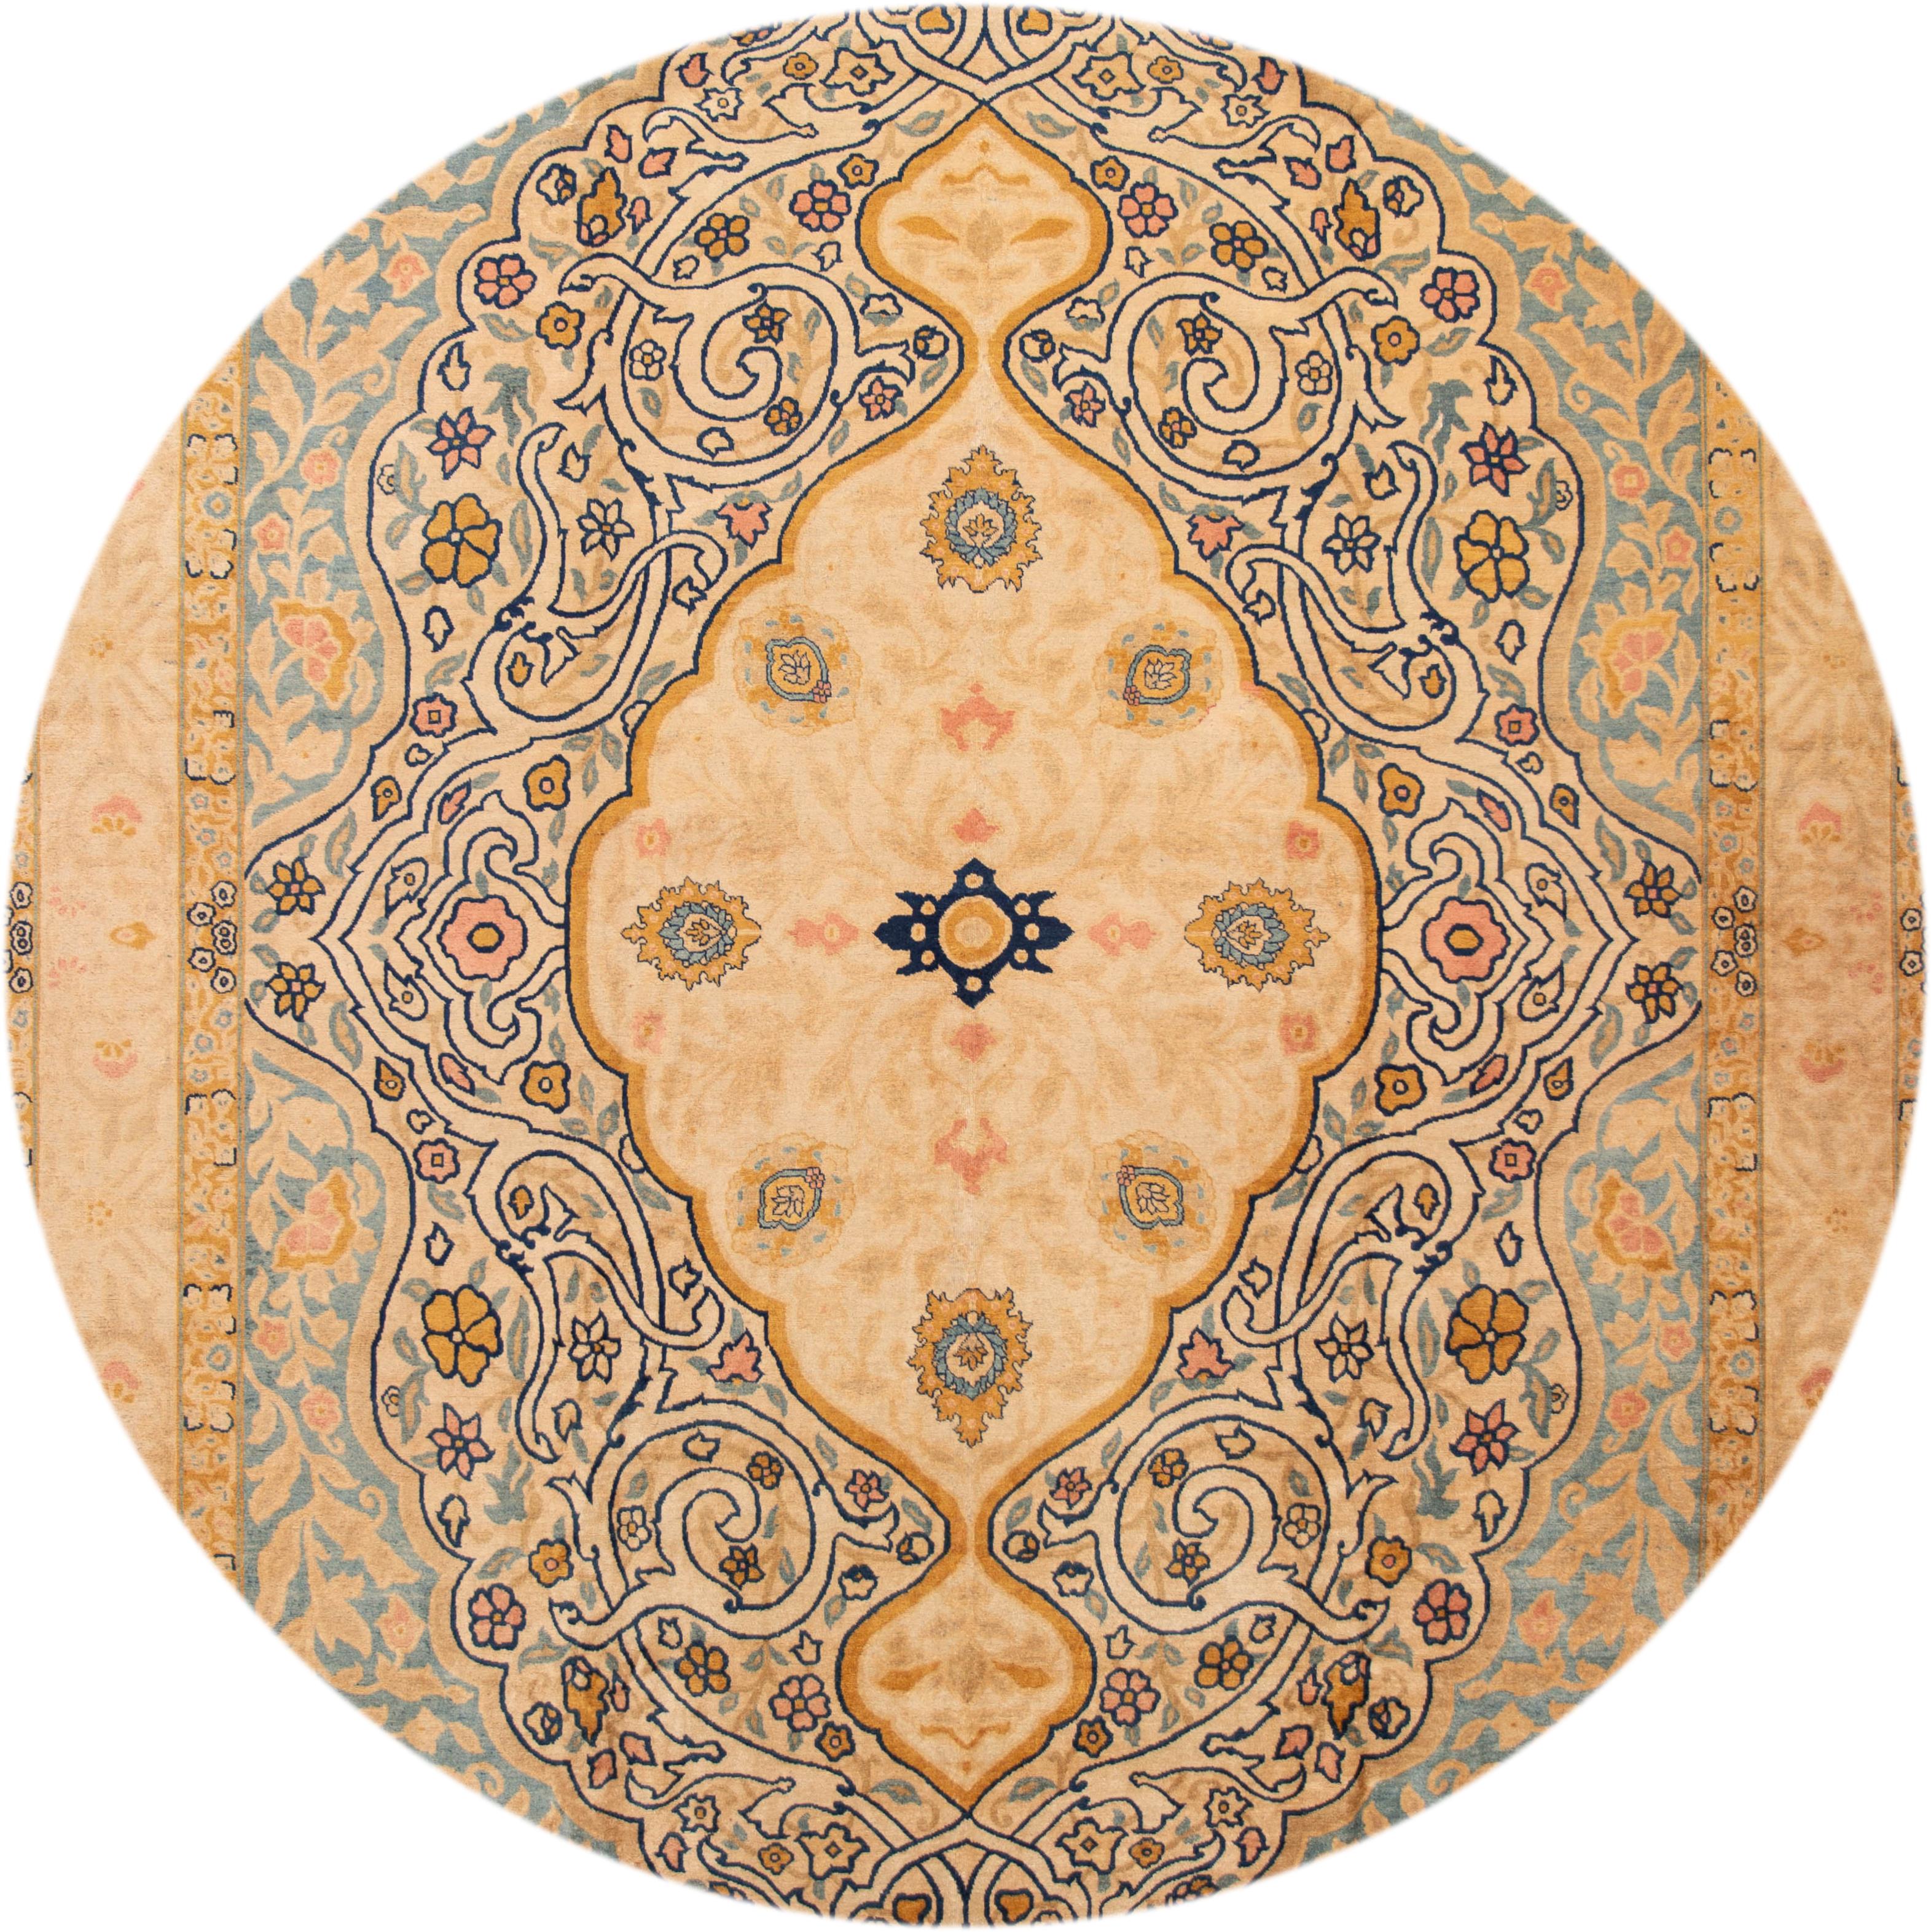 Beautiful antique Persian oversize Tabriz rug, hand-knotted wool with a cream field, gold and blue accents in center medallion design.
This rug measures 11” x 14' 6”
circa 1900.